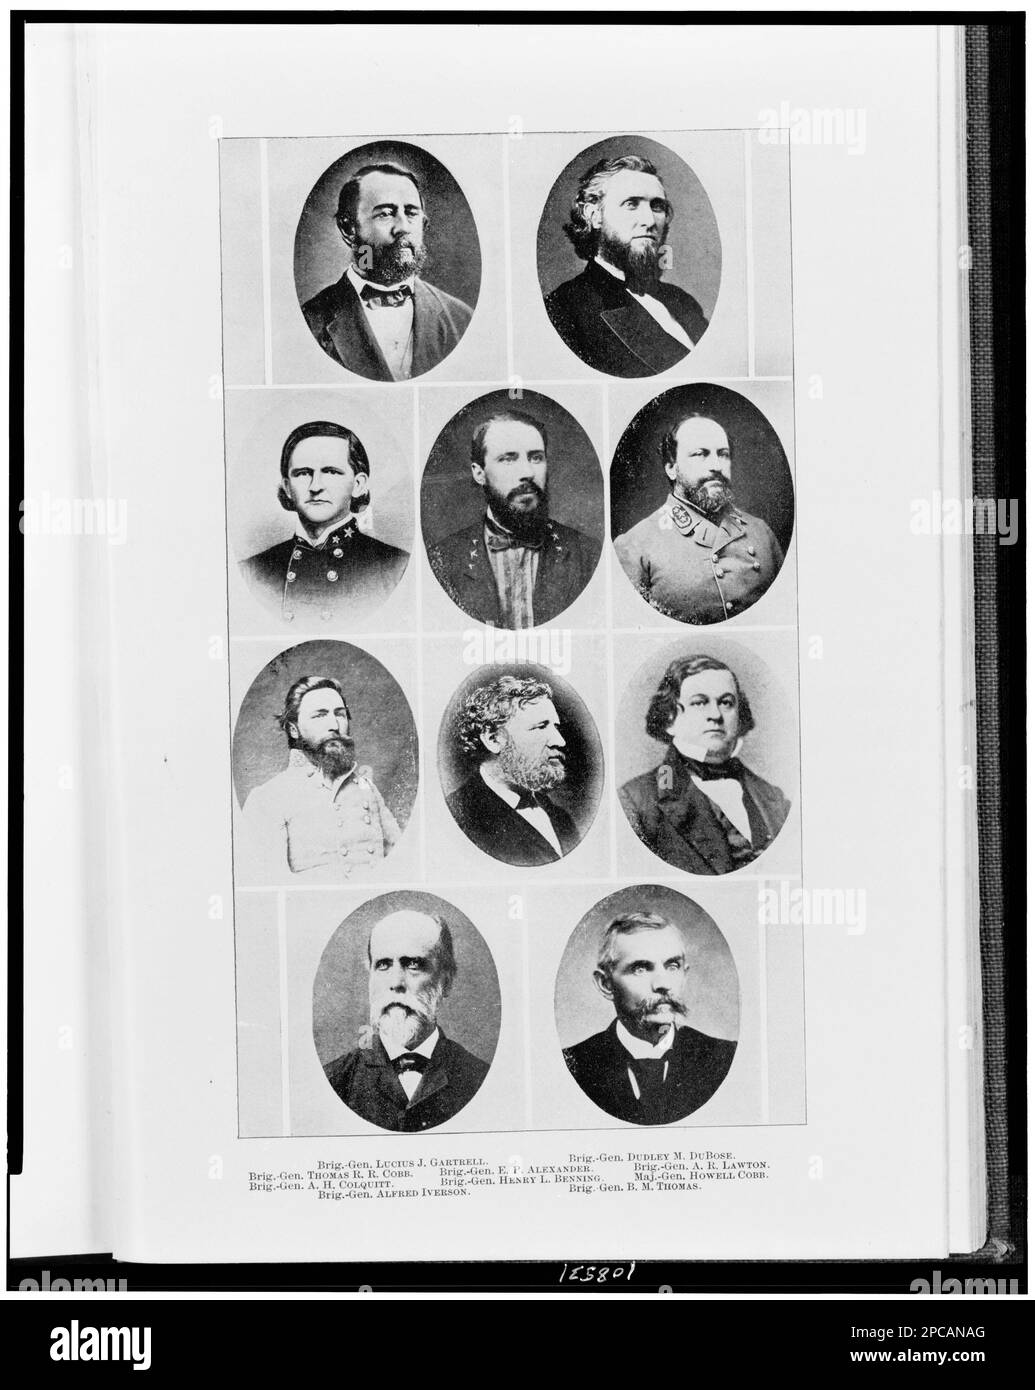 Brigadier-General Lucius J. Gartrell; Brigadier-General Dudley M. DuBose; Brigadier-General Thomas R.R. Cobb; Brigadier-General E.P. Alexander; Brigadier-General A.R. Lawton; Brigadier-General A.H. Colquitt; Brigadier-General Henry L. Benning; Maj.-General Howell Cobb; Brigadier-General Alfred Iverson; Brigadier-General B.M. Thomas. Illus. in: Confederate military history / .. edited by Gen. Clement A. Evans of Georgia. Atlanta, Ga. : Confederate Publishing Company, 1899, vol. 6, oppos. p. 428, Reference copy in LOT 4421-B. United States, History, Civil War, 1861-1865, Military personnel, Conf Stock Photo